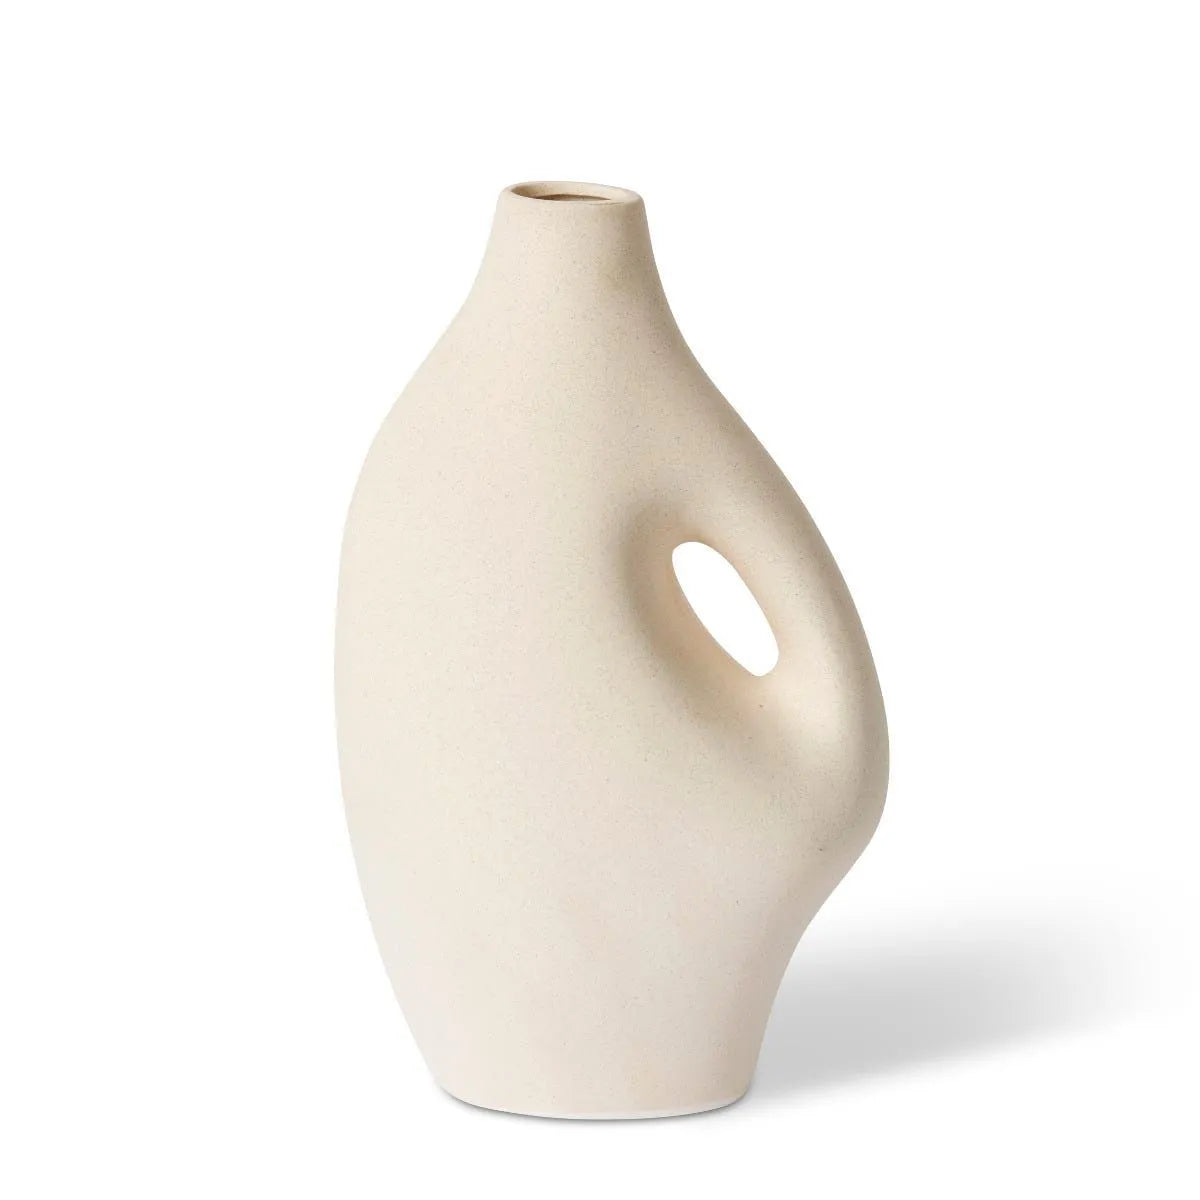 Our Addison Vase adds exquisite beauty to any interior décor. Made from ceramic, this elegant vase gives a classic and eye-catching display in any room. Experience a unique and timeless charm with this elegant home accessory.